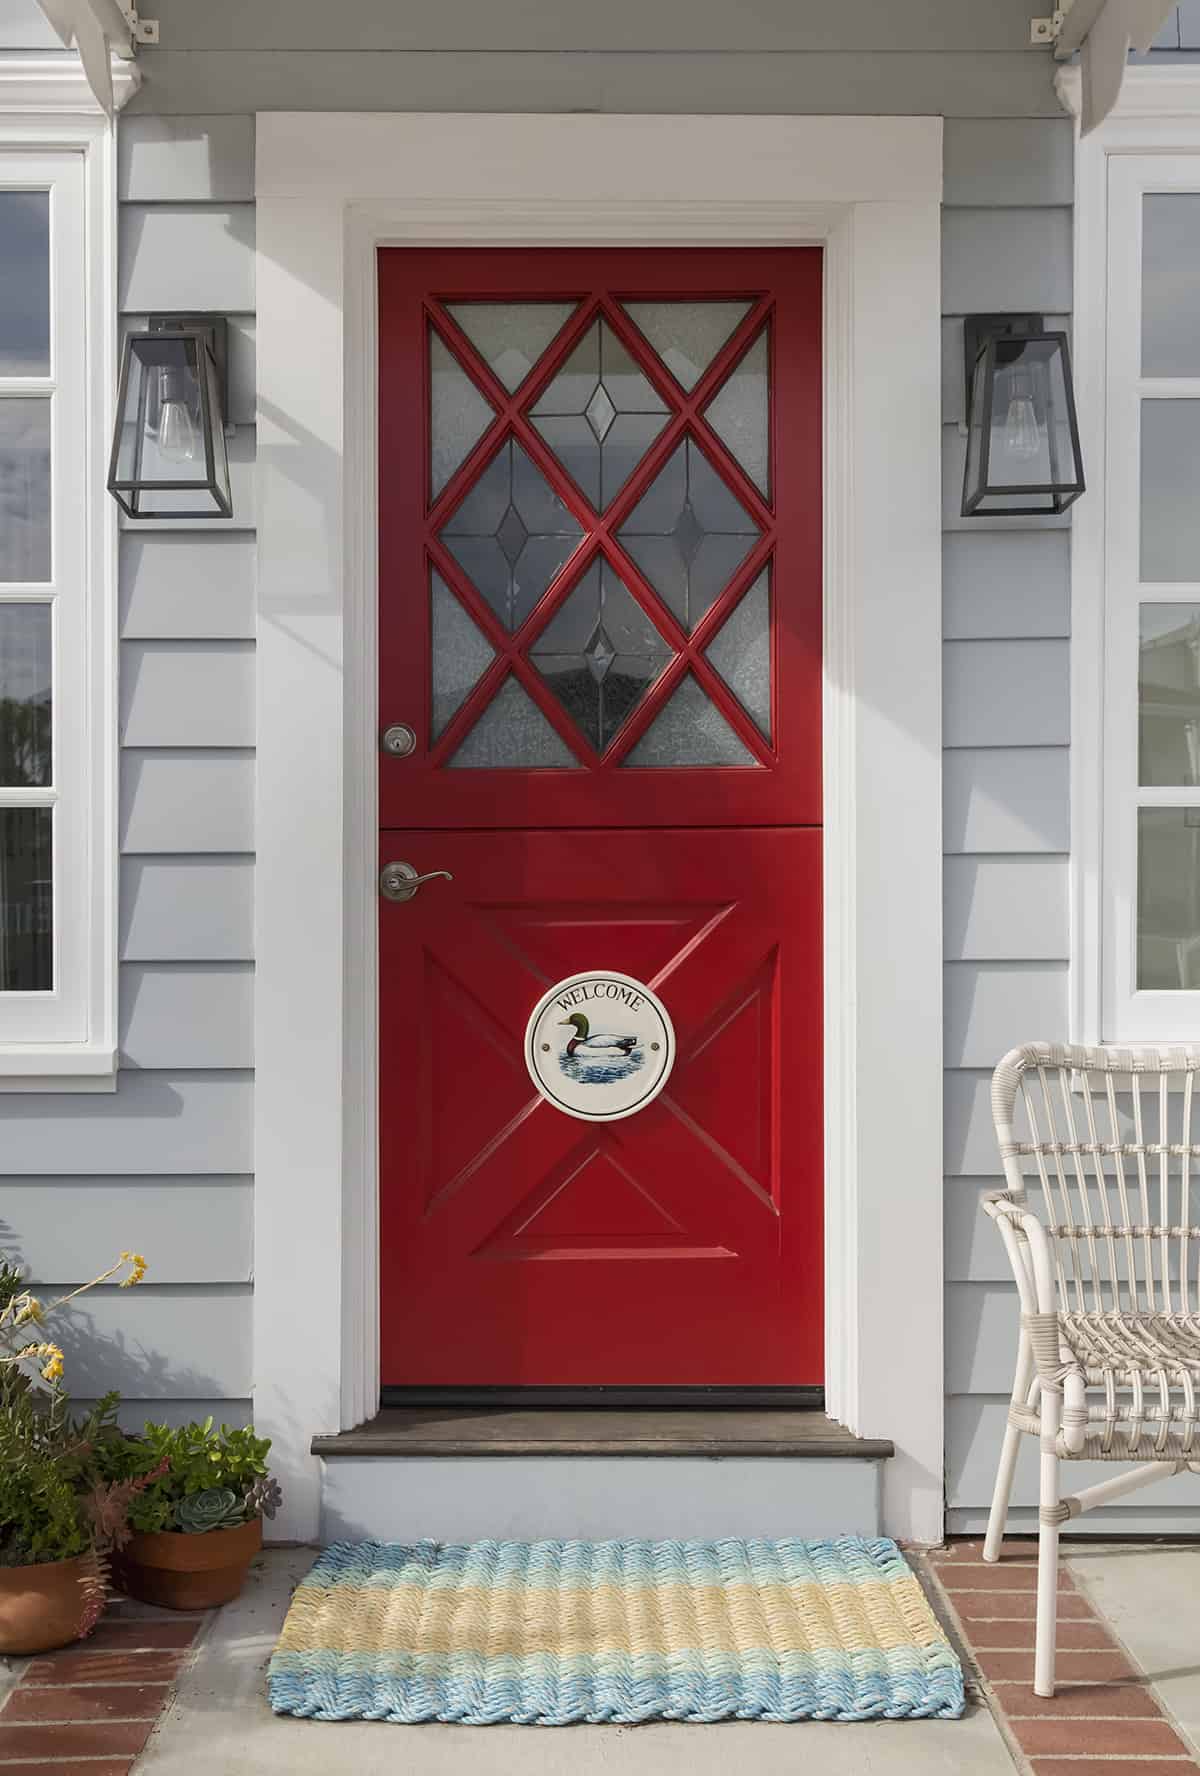 Match Your Red Door with the Gray Tone of Your House